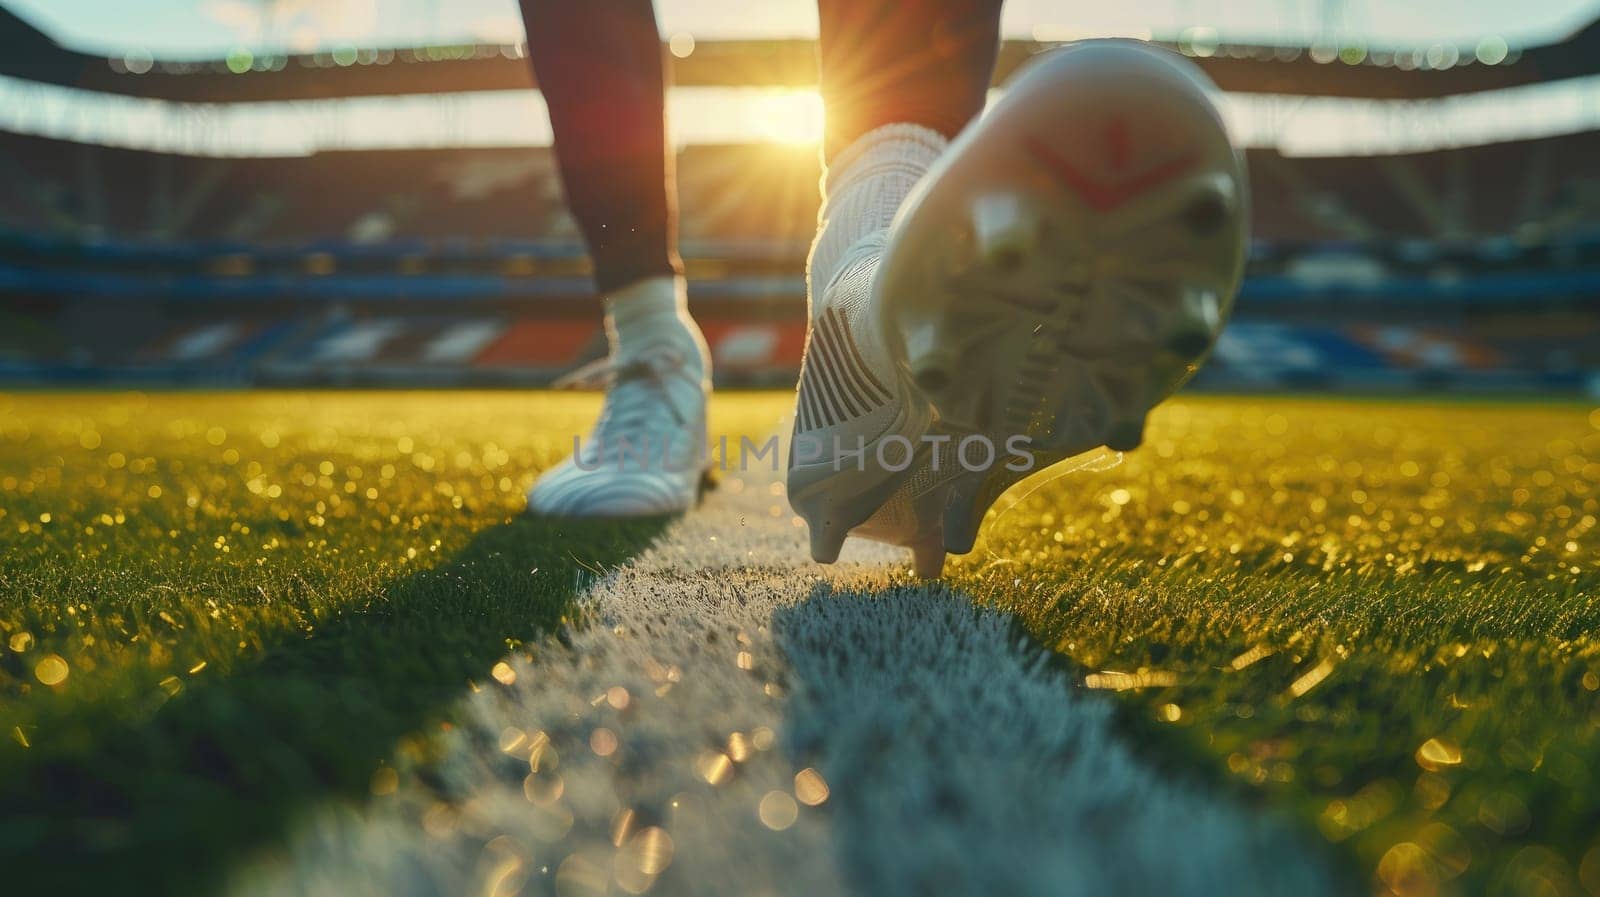 A athlete's feet in soccer shoes in the stadium, Soccer player feet standing on the green grass at stadium.